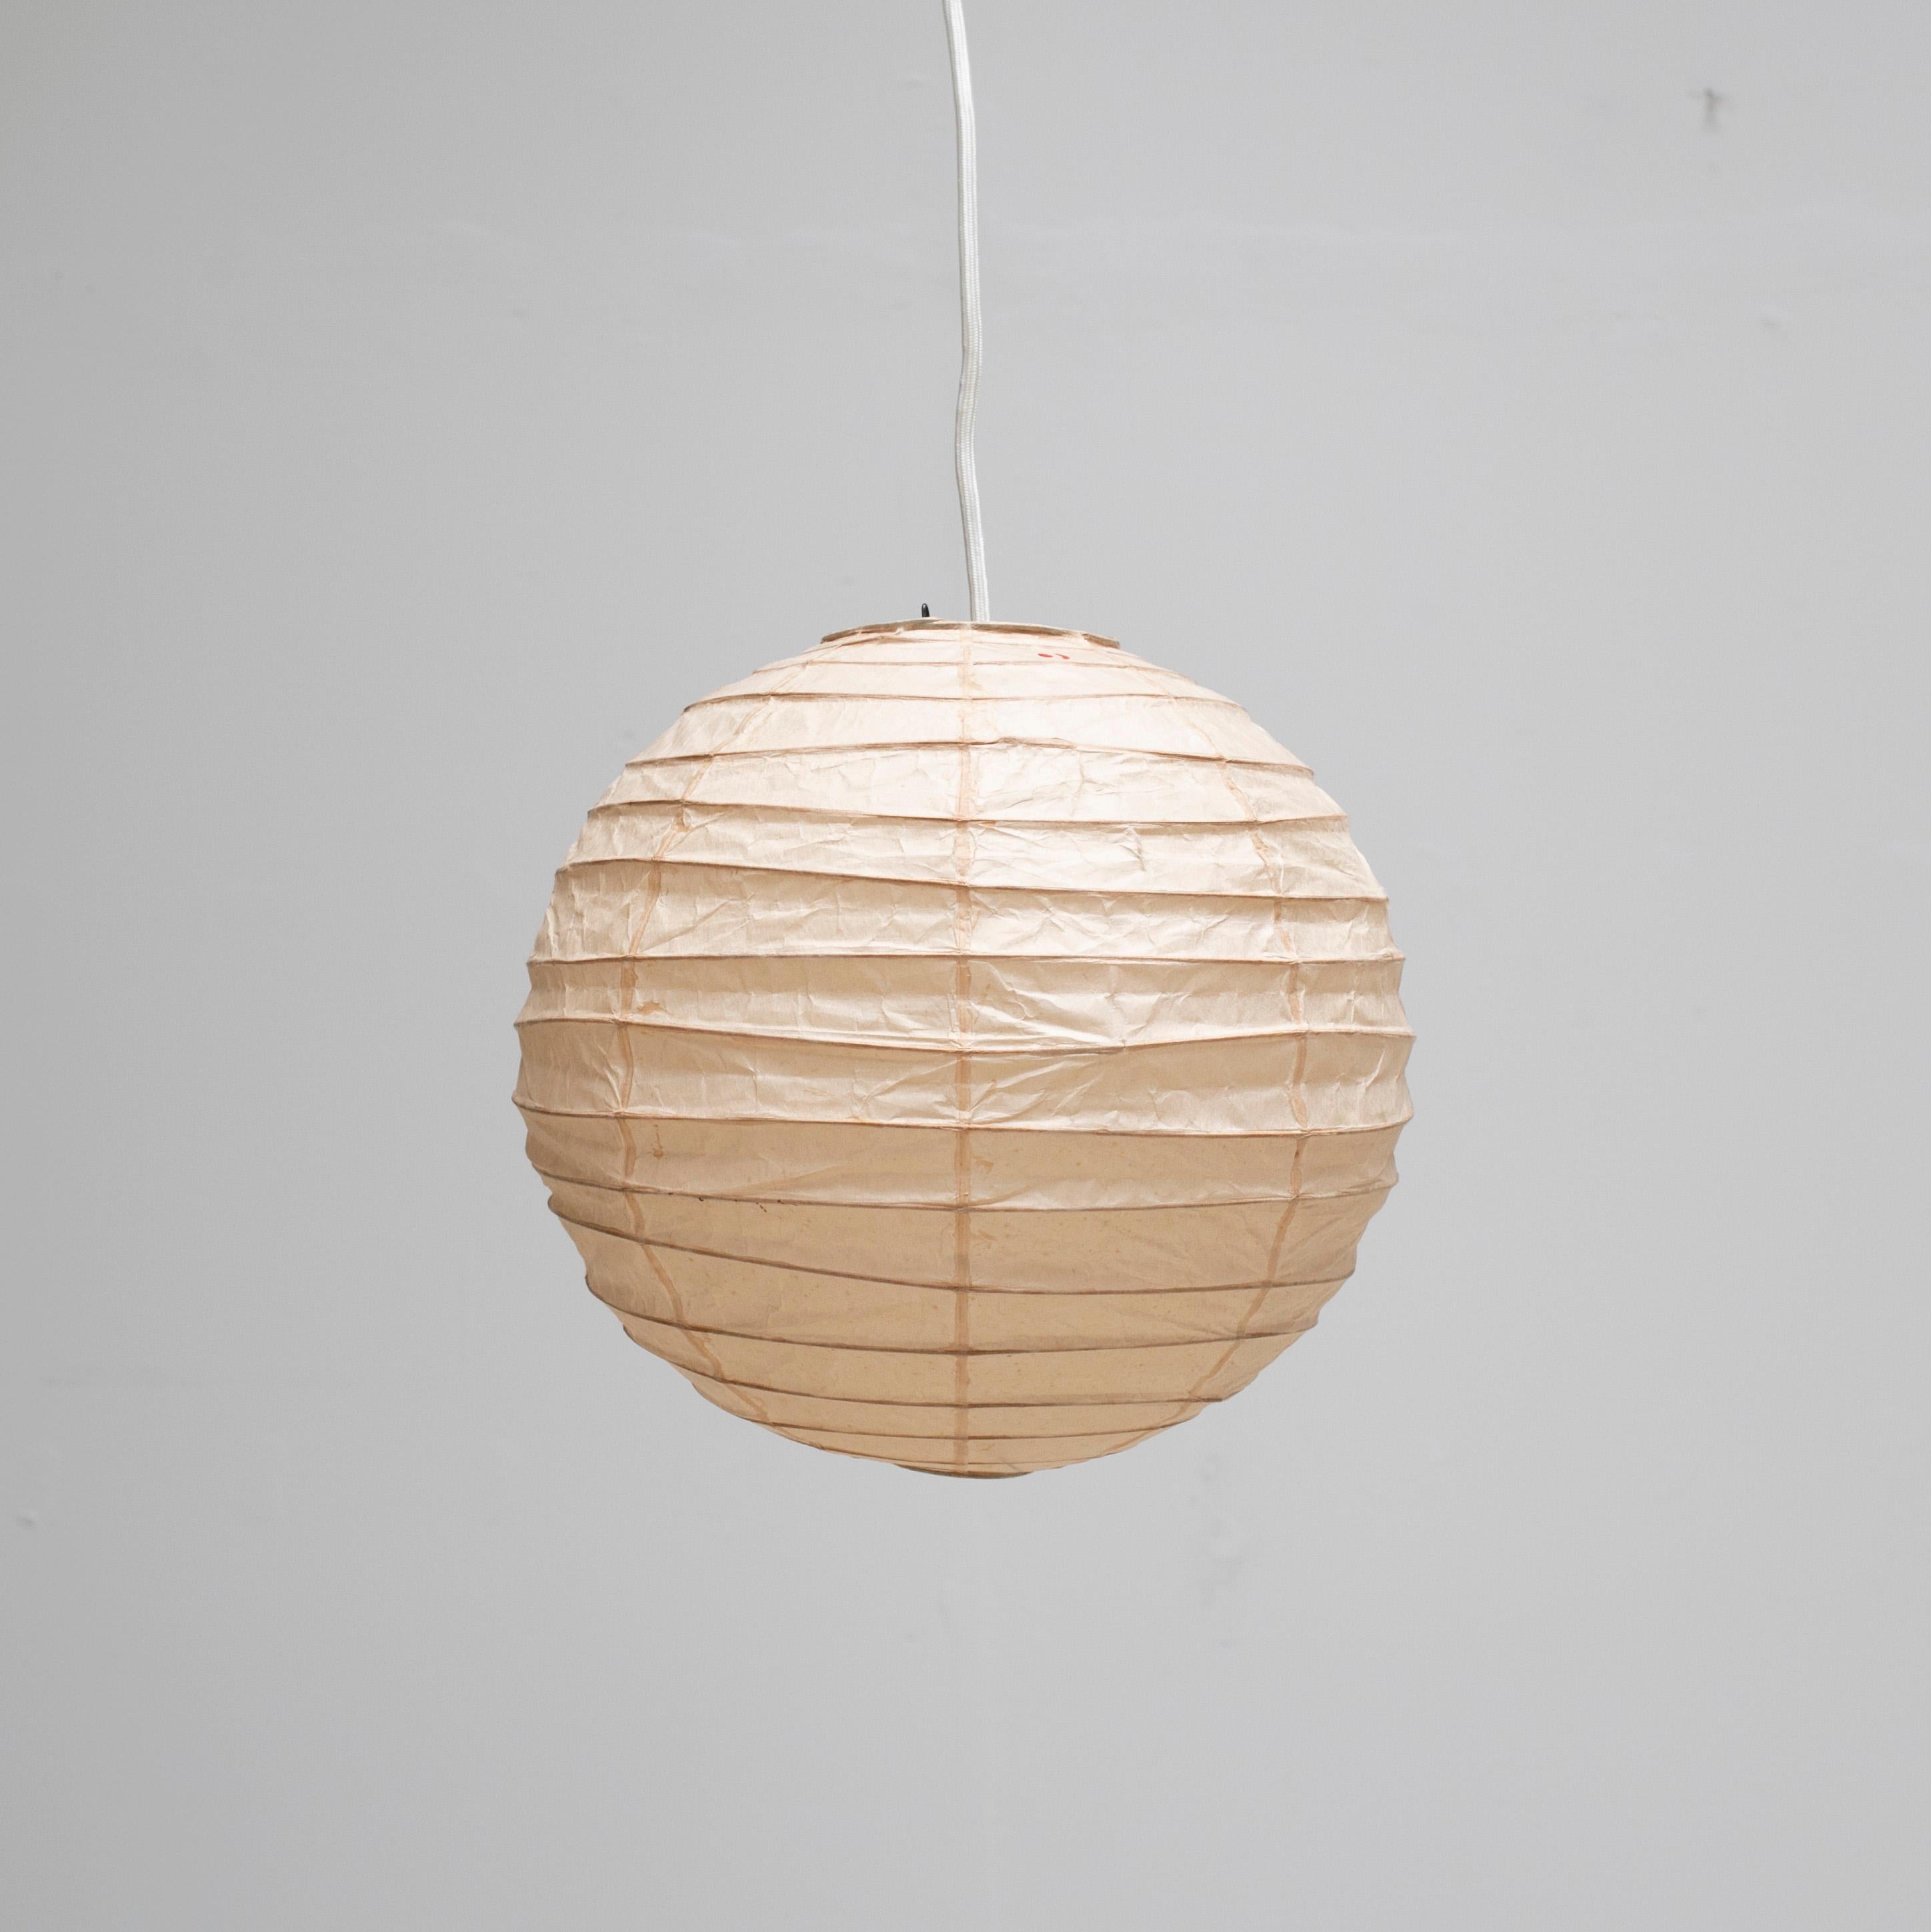 Vintage Akari pendant lamp designed by Isamu Noguchi.
Made with washiest paper and thin strips of the bamboo.

There are some torn.
For the condition, see the images attached.